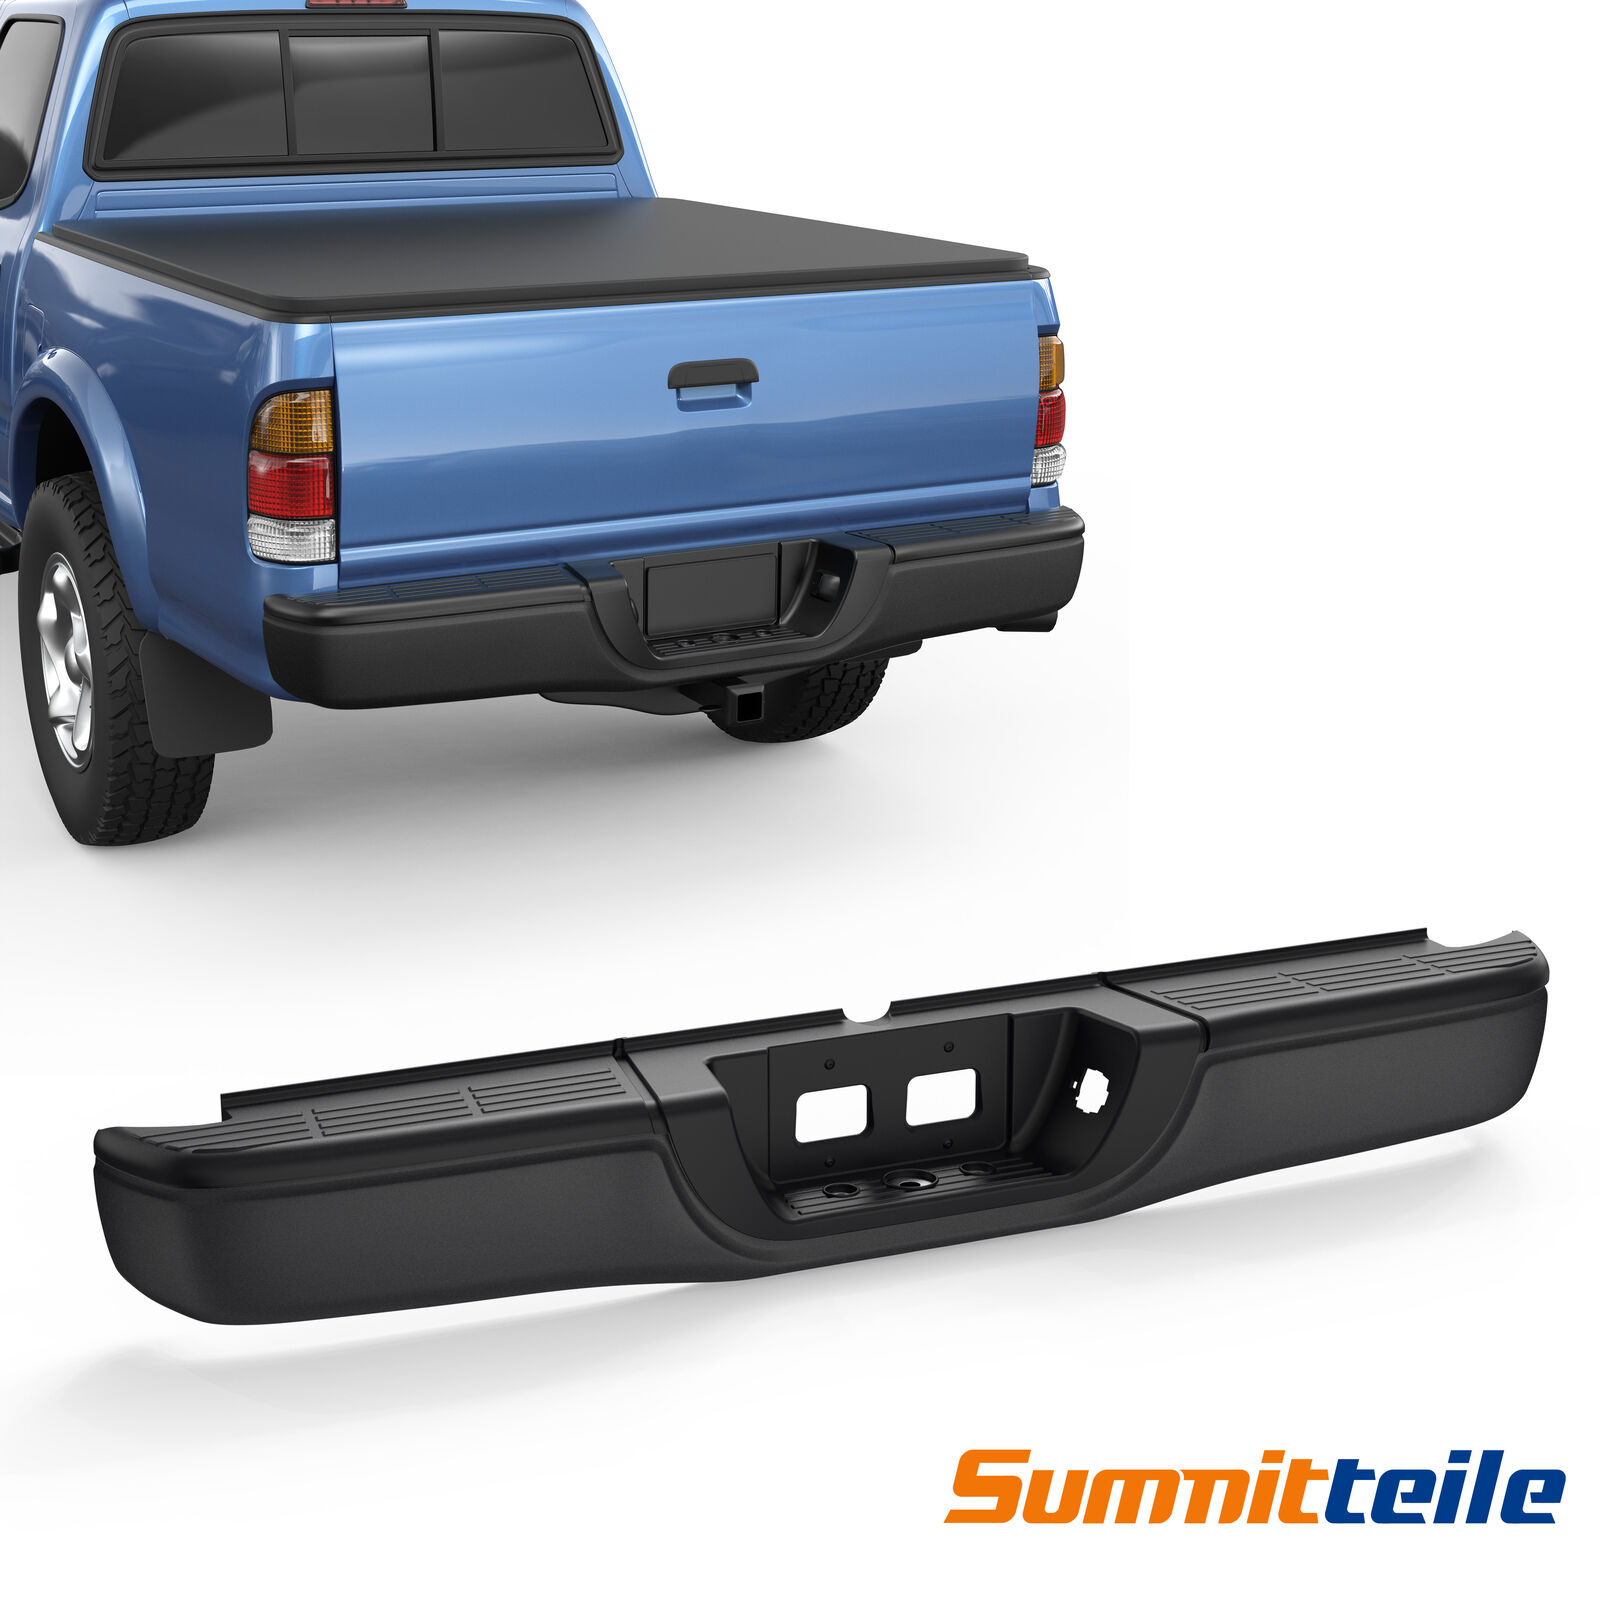 Black Steel Rear Step Bumper For 2000-2006 Toyota Tundra With Standard Bed